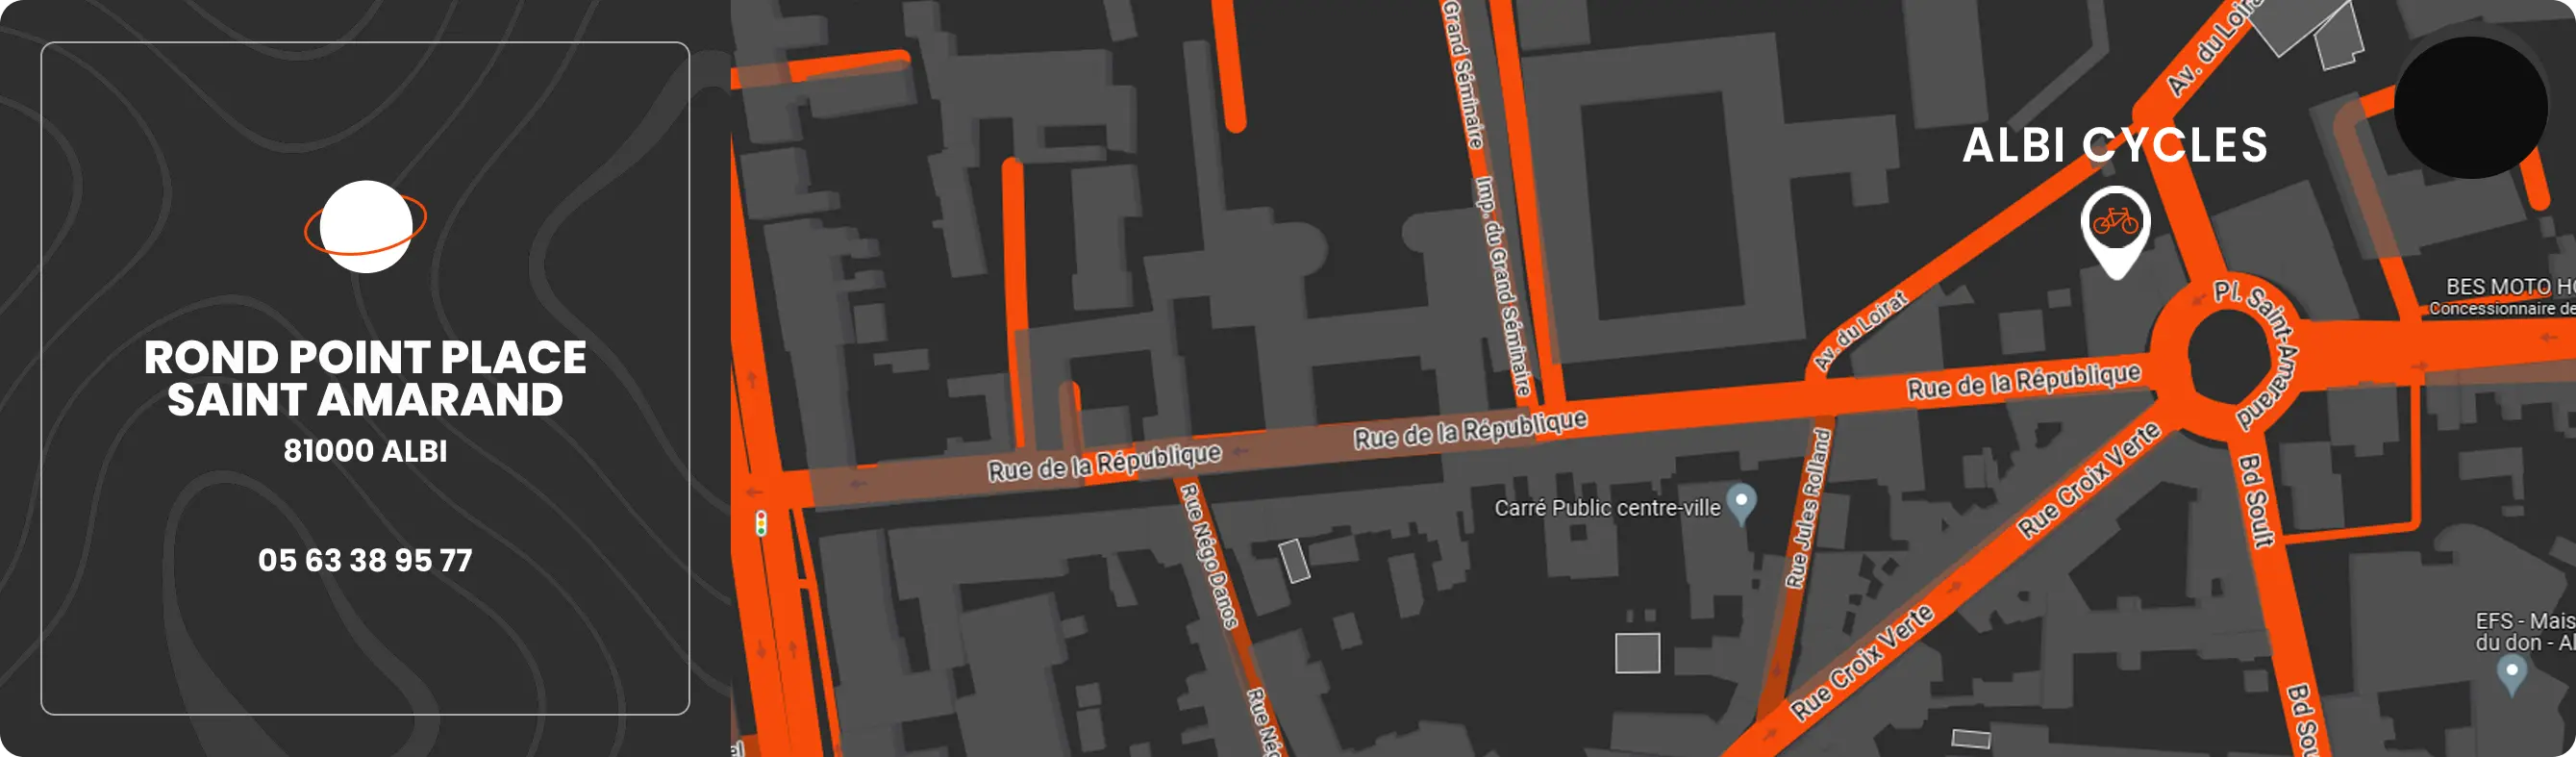 map localisation albi cycles